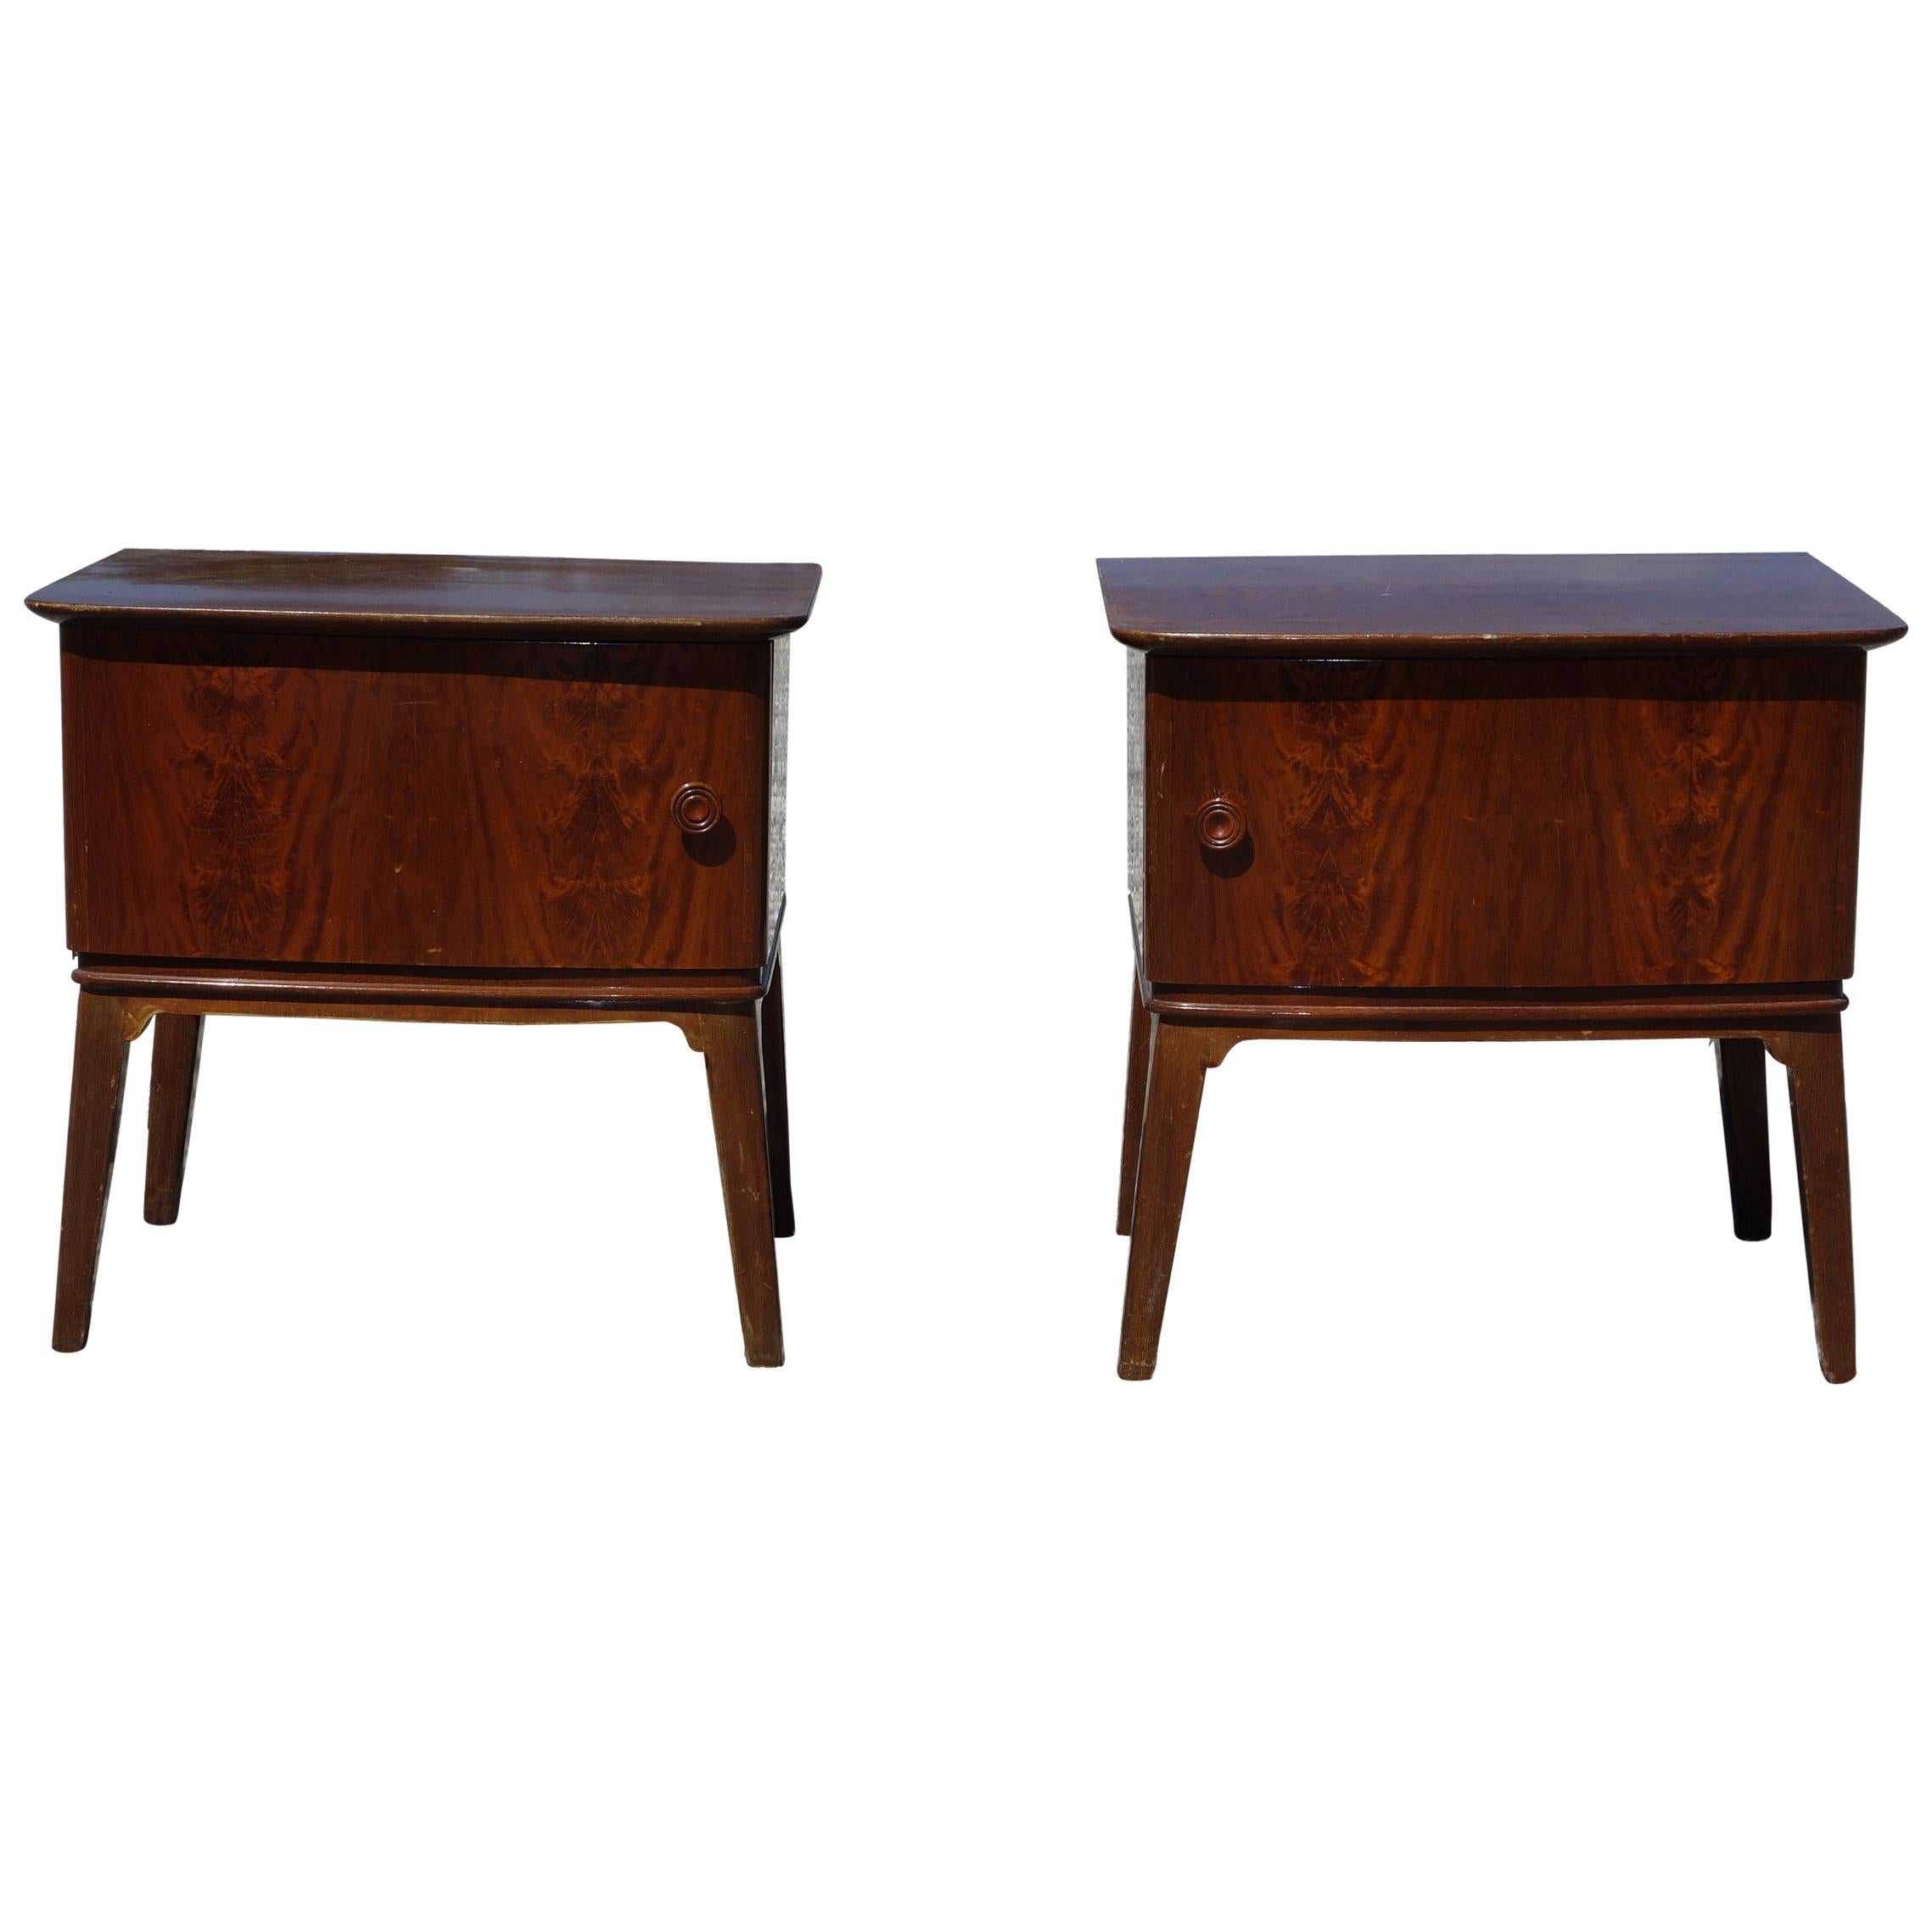 Pair of 1940s-1950s Bedside Tables in Flamed Mahogany Wood For Sale